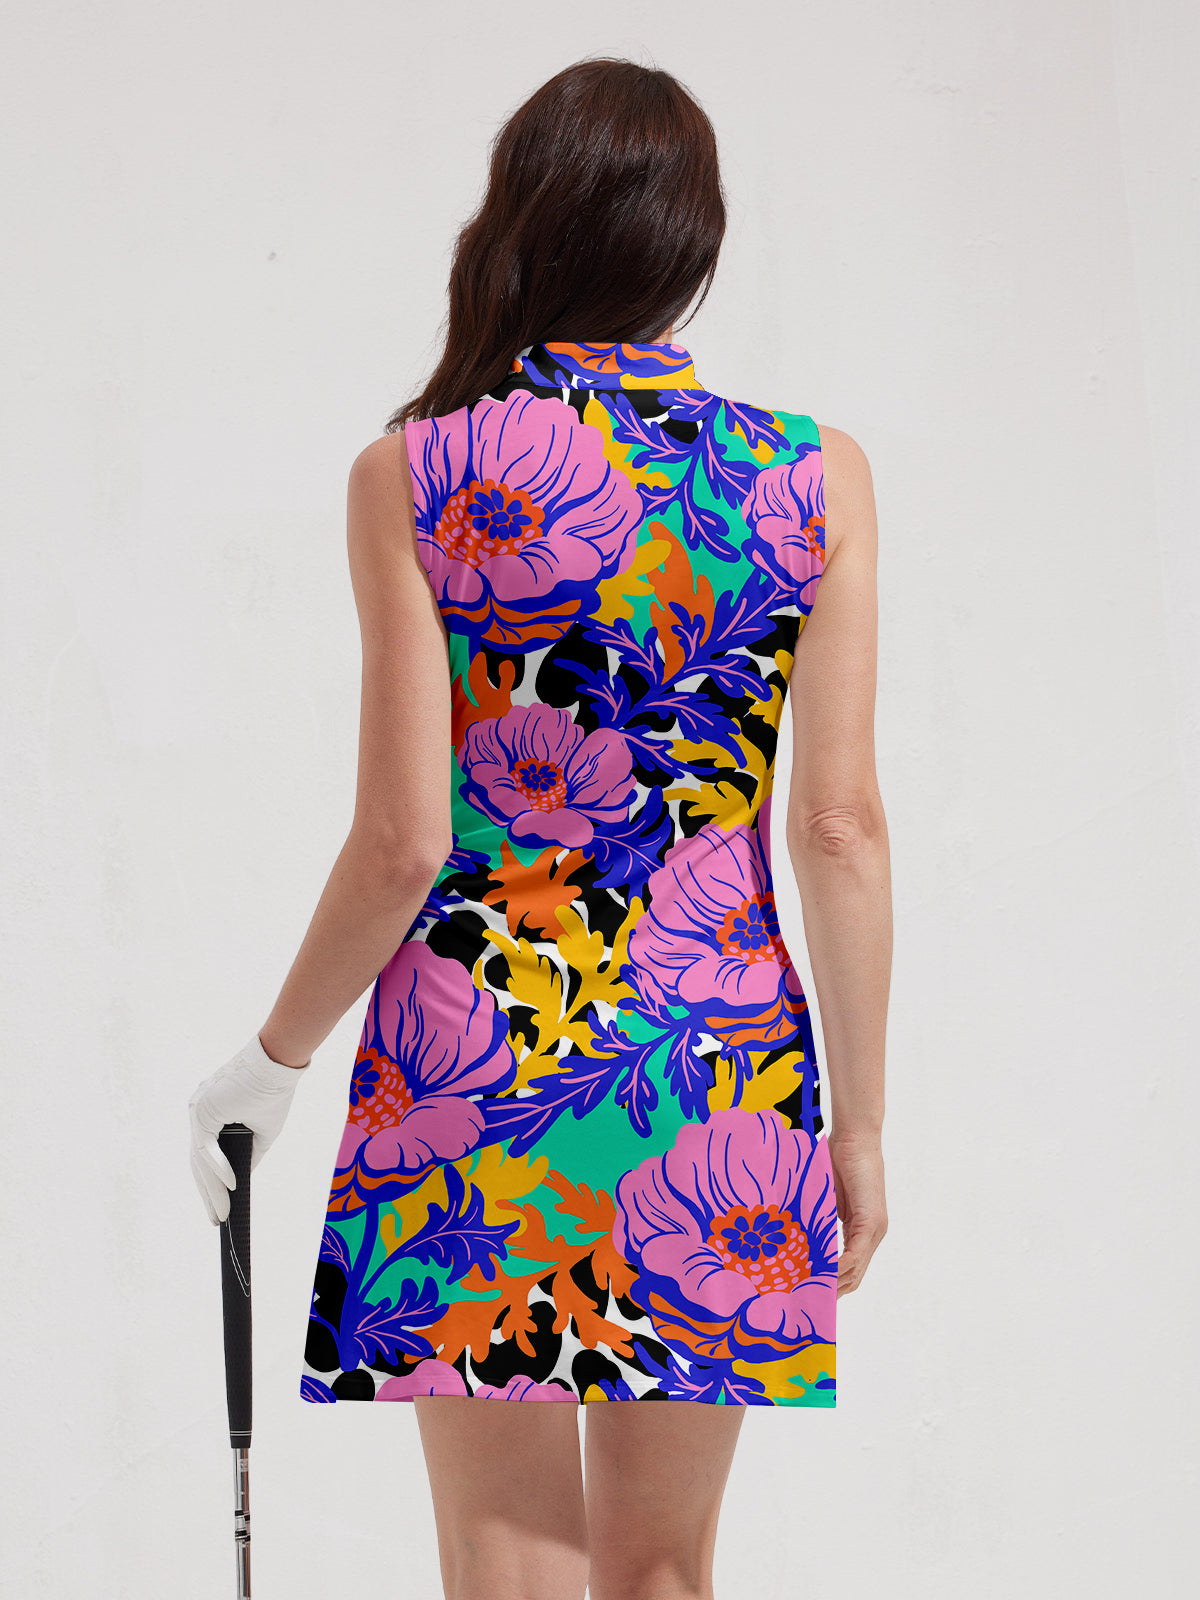 Hyped-up Tropical-Dress UPF50+